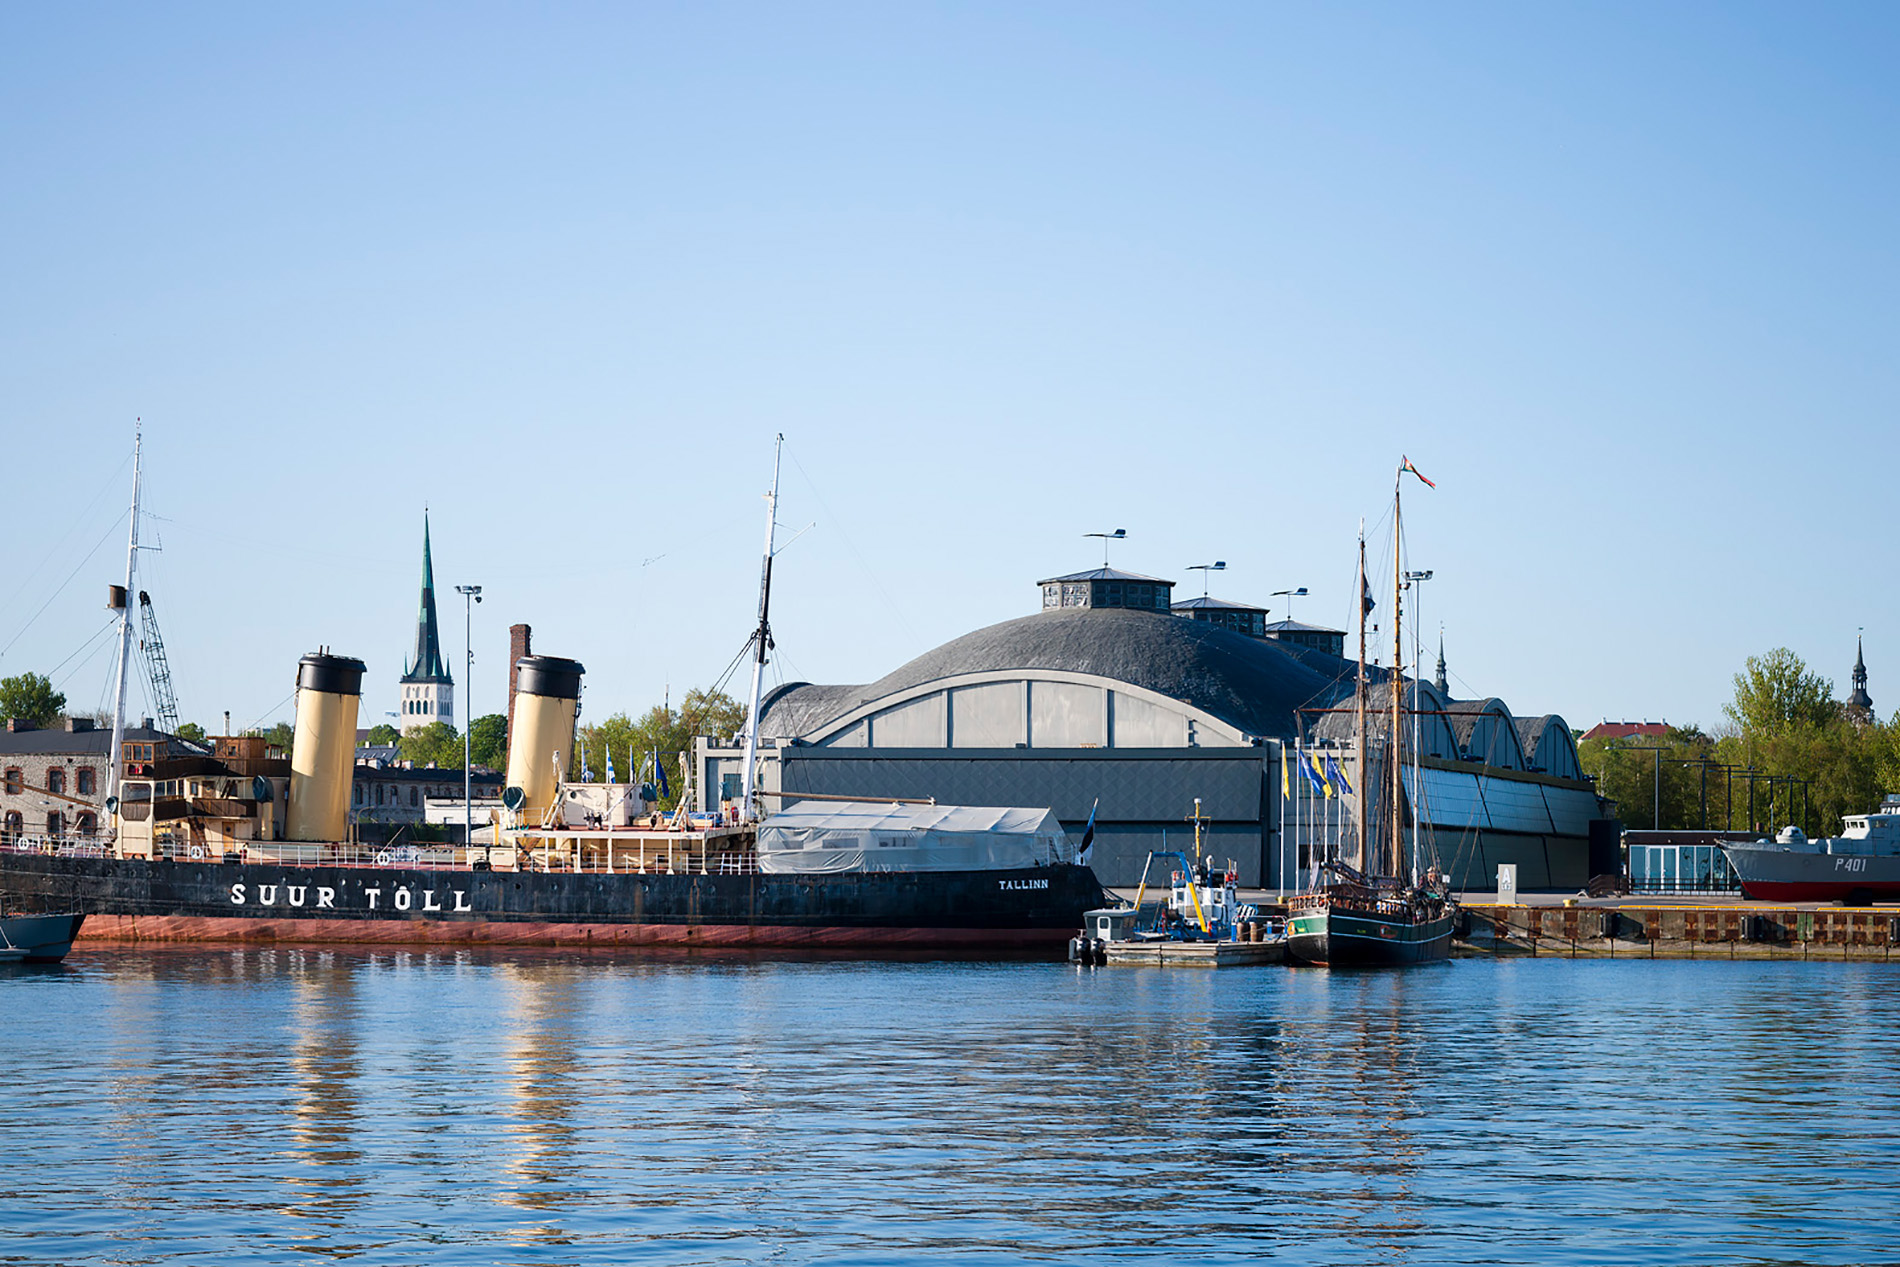 By creating interactive multimedia solutions, Motor has helped the Seaplane Harbour to quickly grow into one of the most popular attractions in the Baltics. Lennusadam